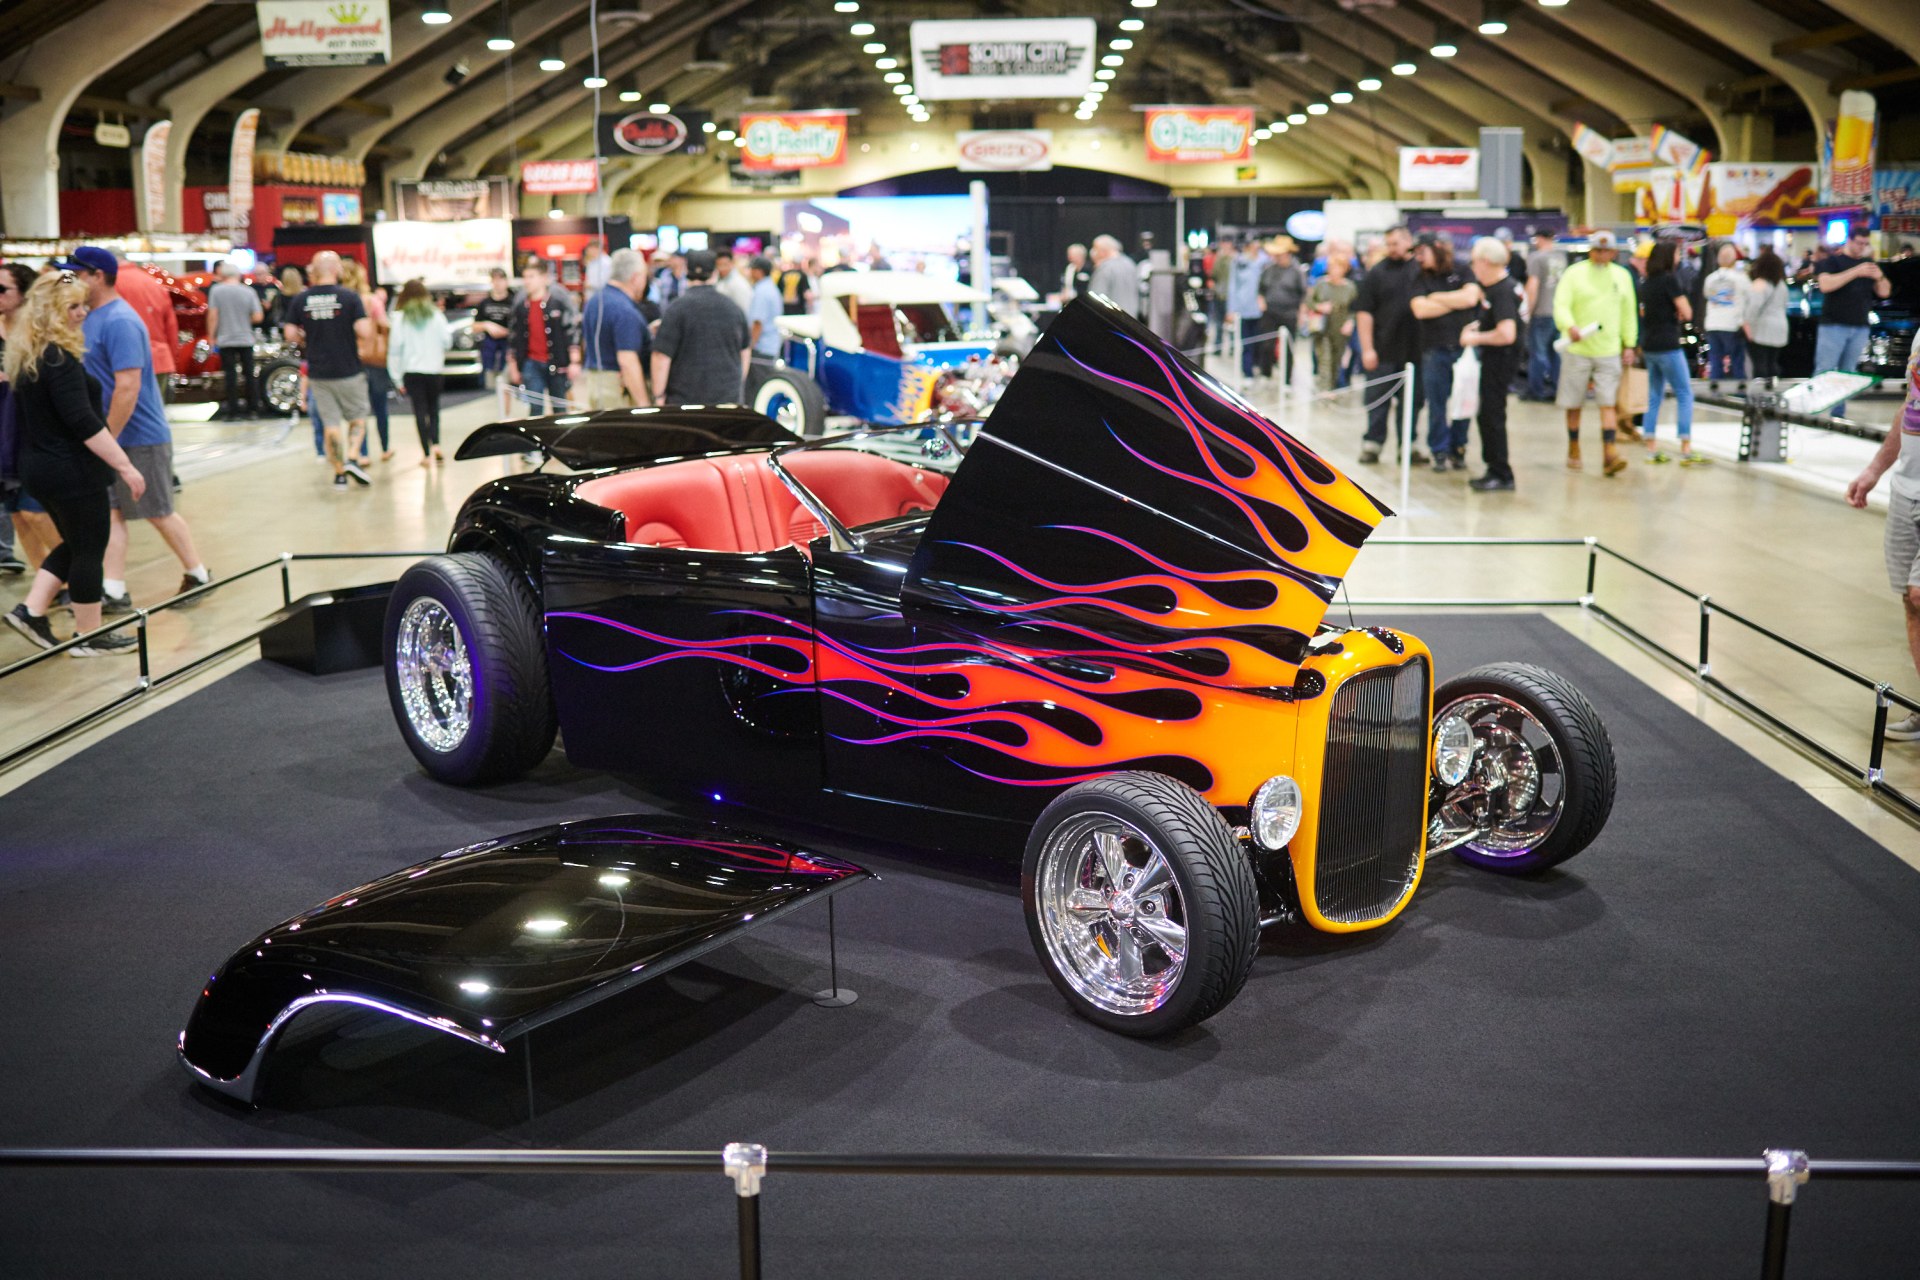 2022 Grand National Roadster Show Date Confirmed, Will Have Over 600